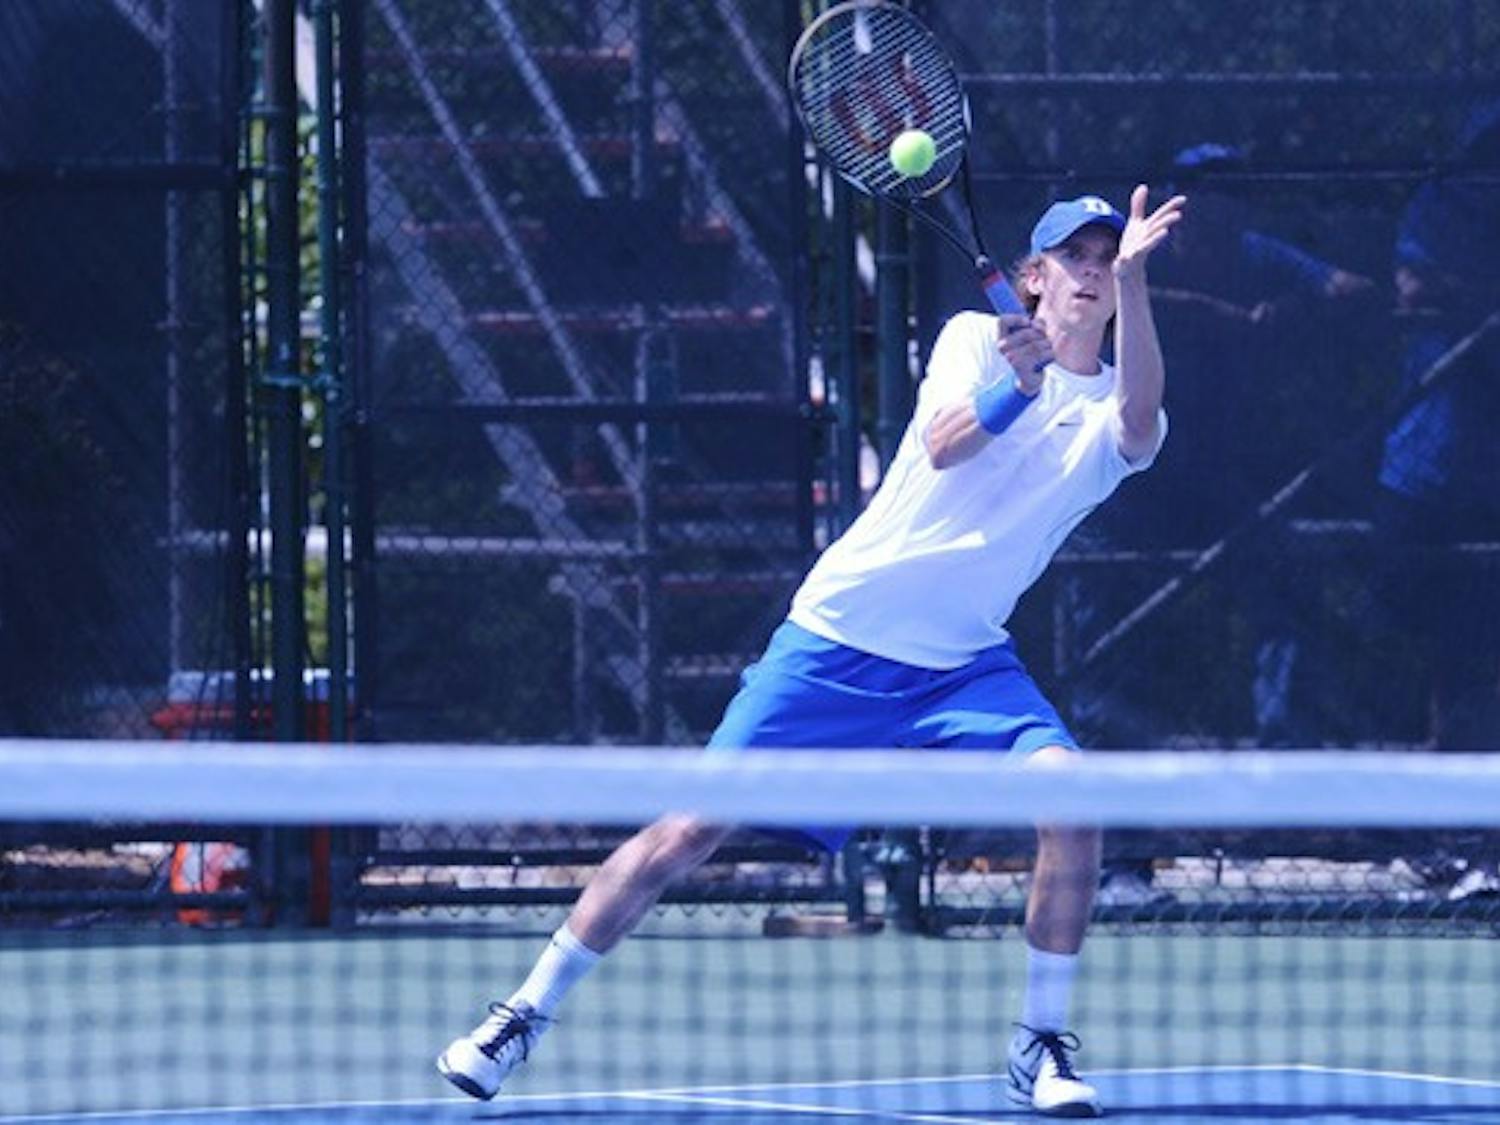 Playing against the nation’s second-best player, Alex Domijan, Reid Carleton watched his first set lead collapse. He then lost 6-0 in the second set.